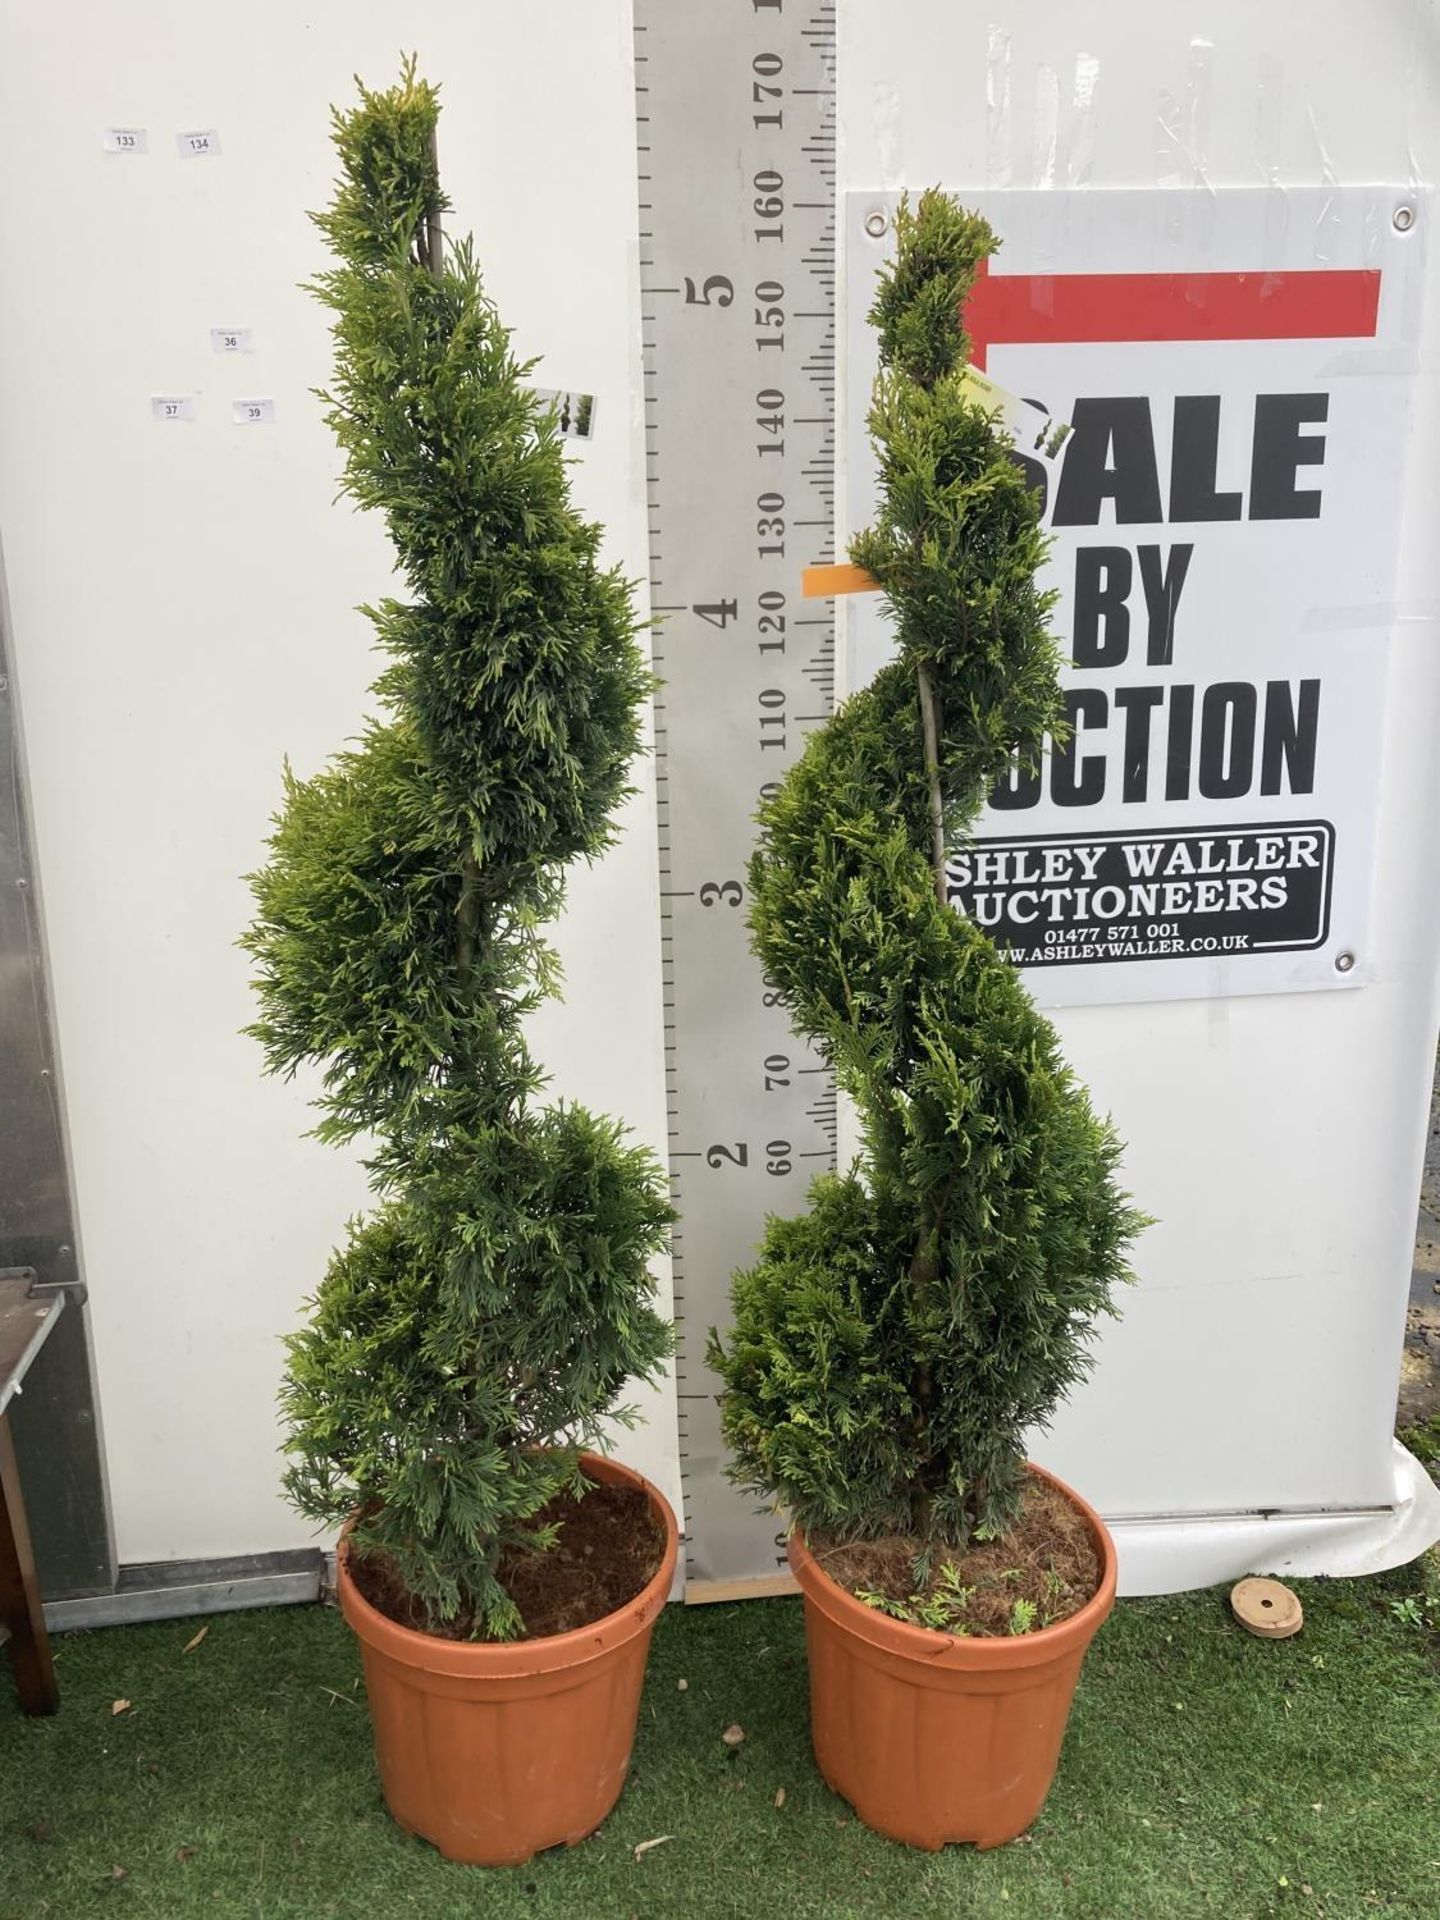 TWO SPIRAL CUPRESSOCYPARIS LEYLANDII 'GOLD RIDER' OVER 150CM IN HEIGHT IN 15LTR POTS TO BE SOLD